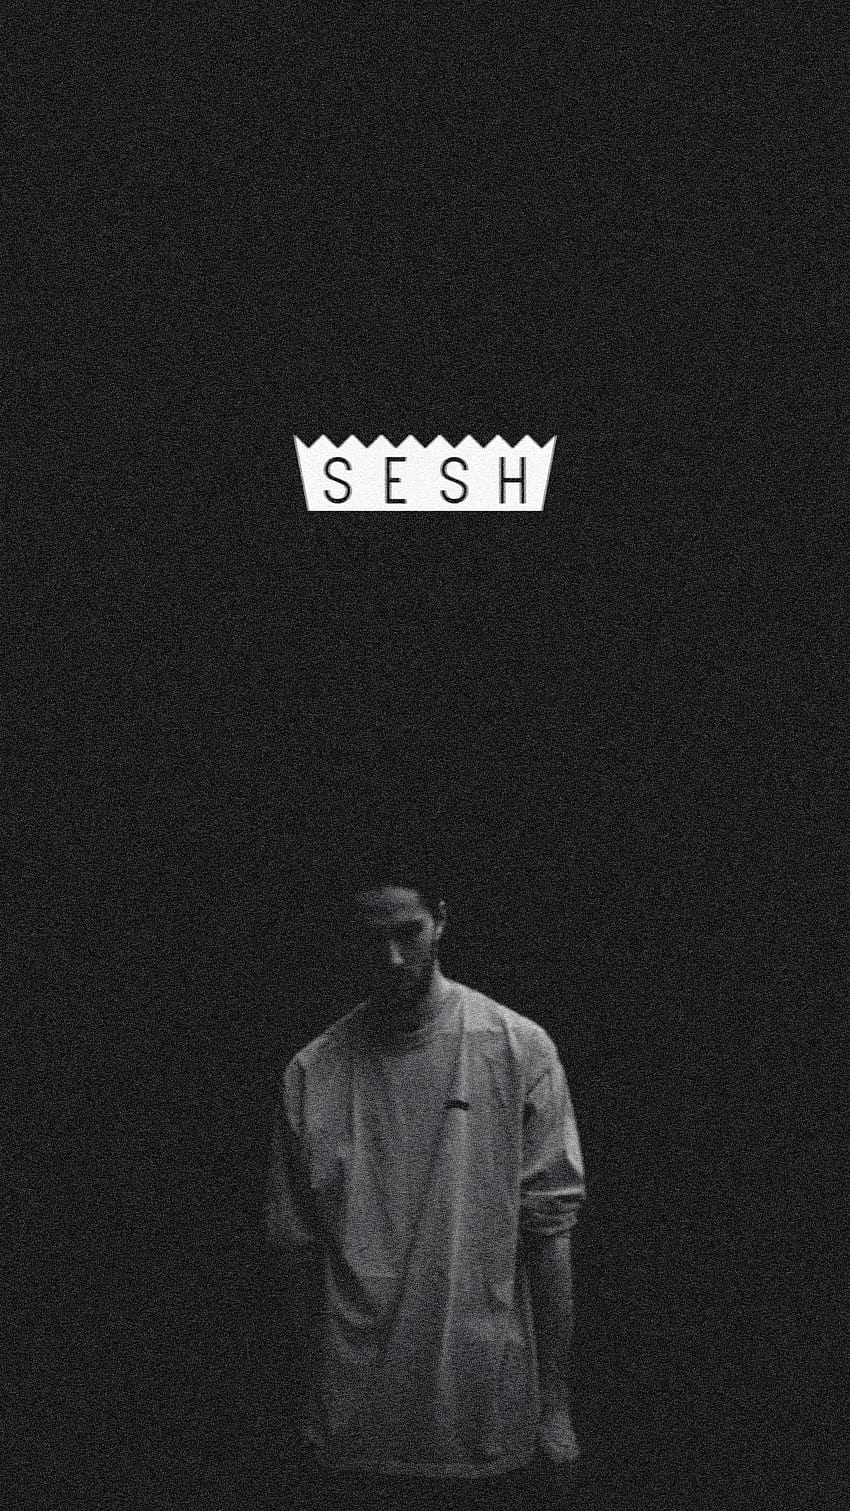 Anyone else have good BONES or Team SESH ? This is the one I have now but I was wondering if there are other dope ones. This specific is not made HD phone wallpaper